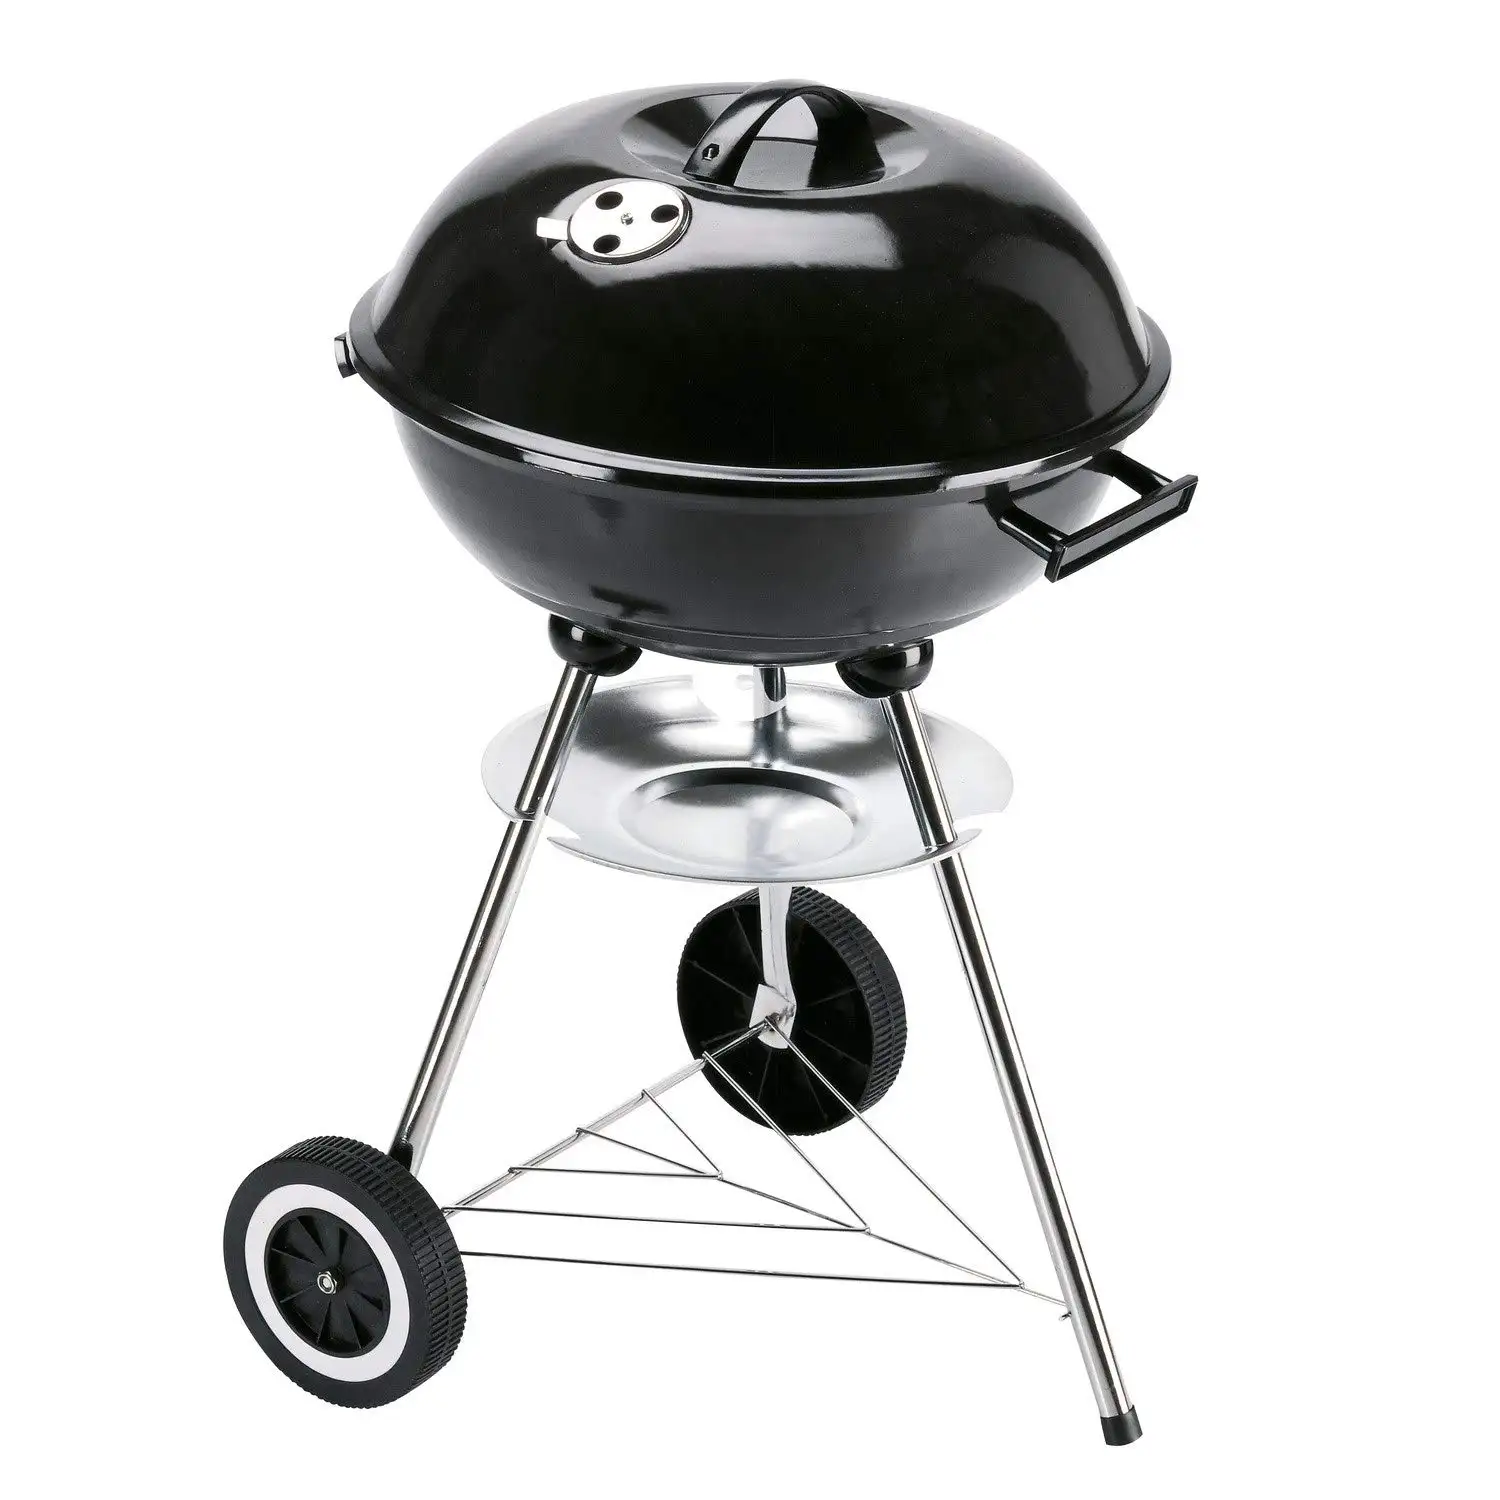 Factory Custom Multi Size Apple Shaped Grill Barbecue Garden Grill Metal Round Fire Pit Kettle Smoker BBQ Grill